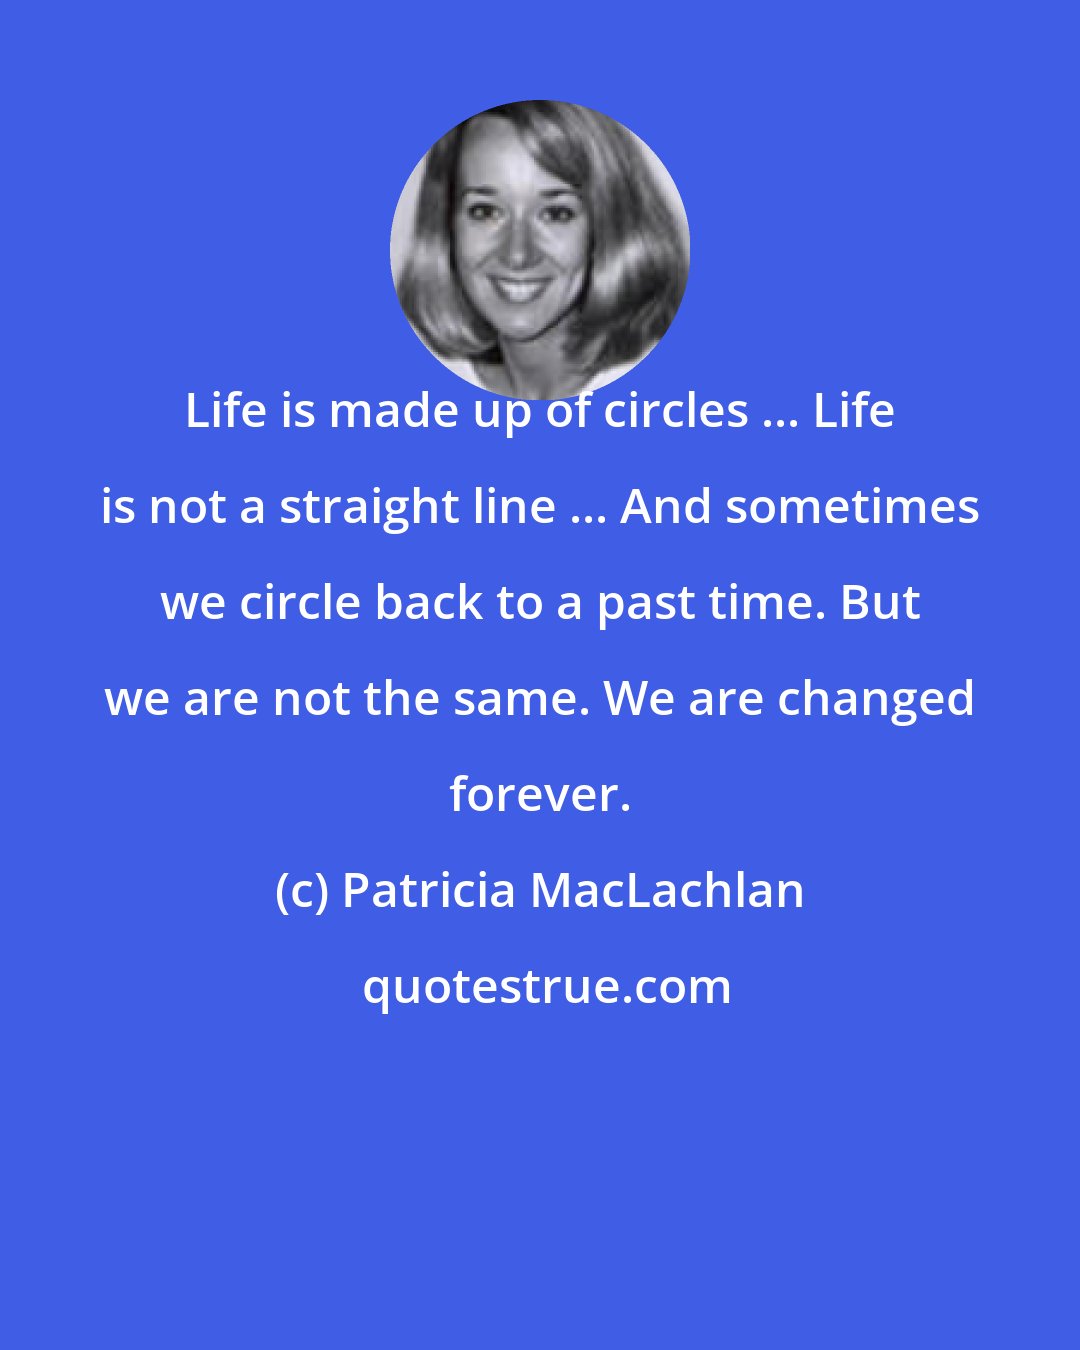 Patricia MacLachlan: Life is made up of circles ... Life is not a straight line ... And sometimes we circle back to a past time. But we are not the same. We are changed forever.